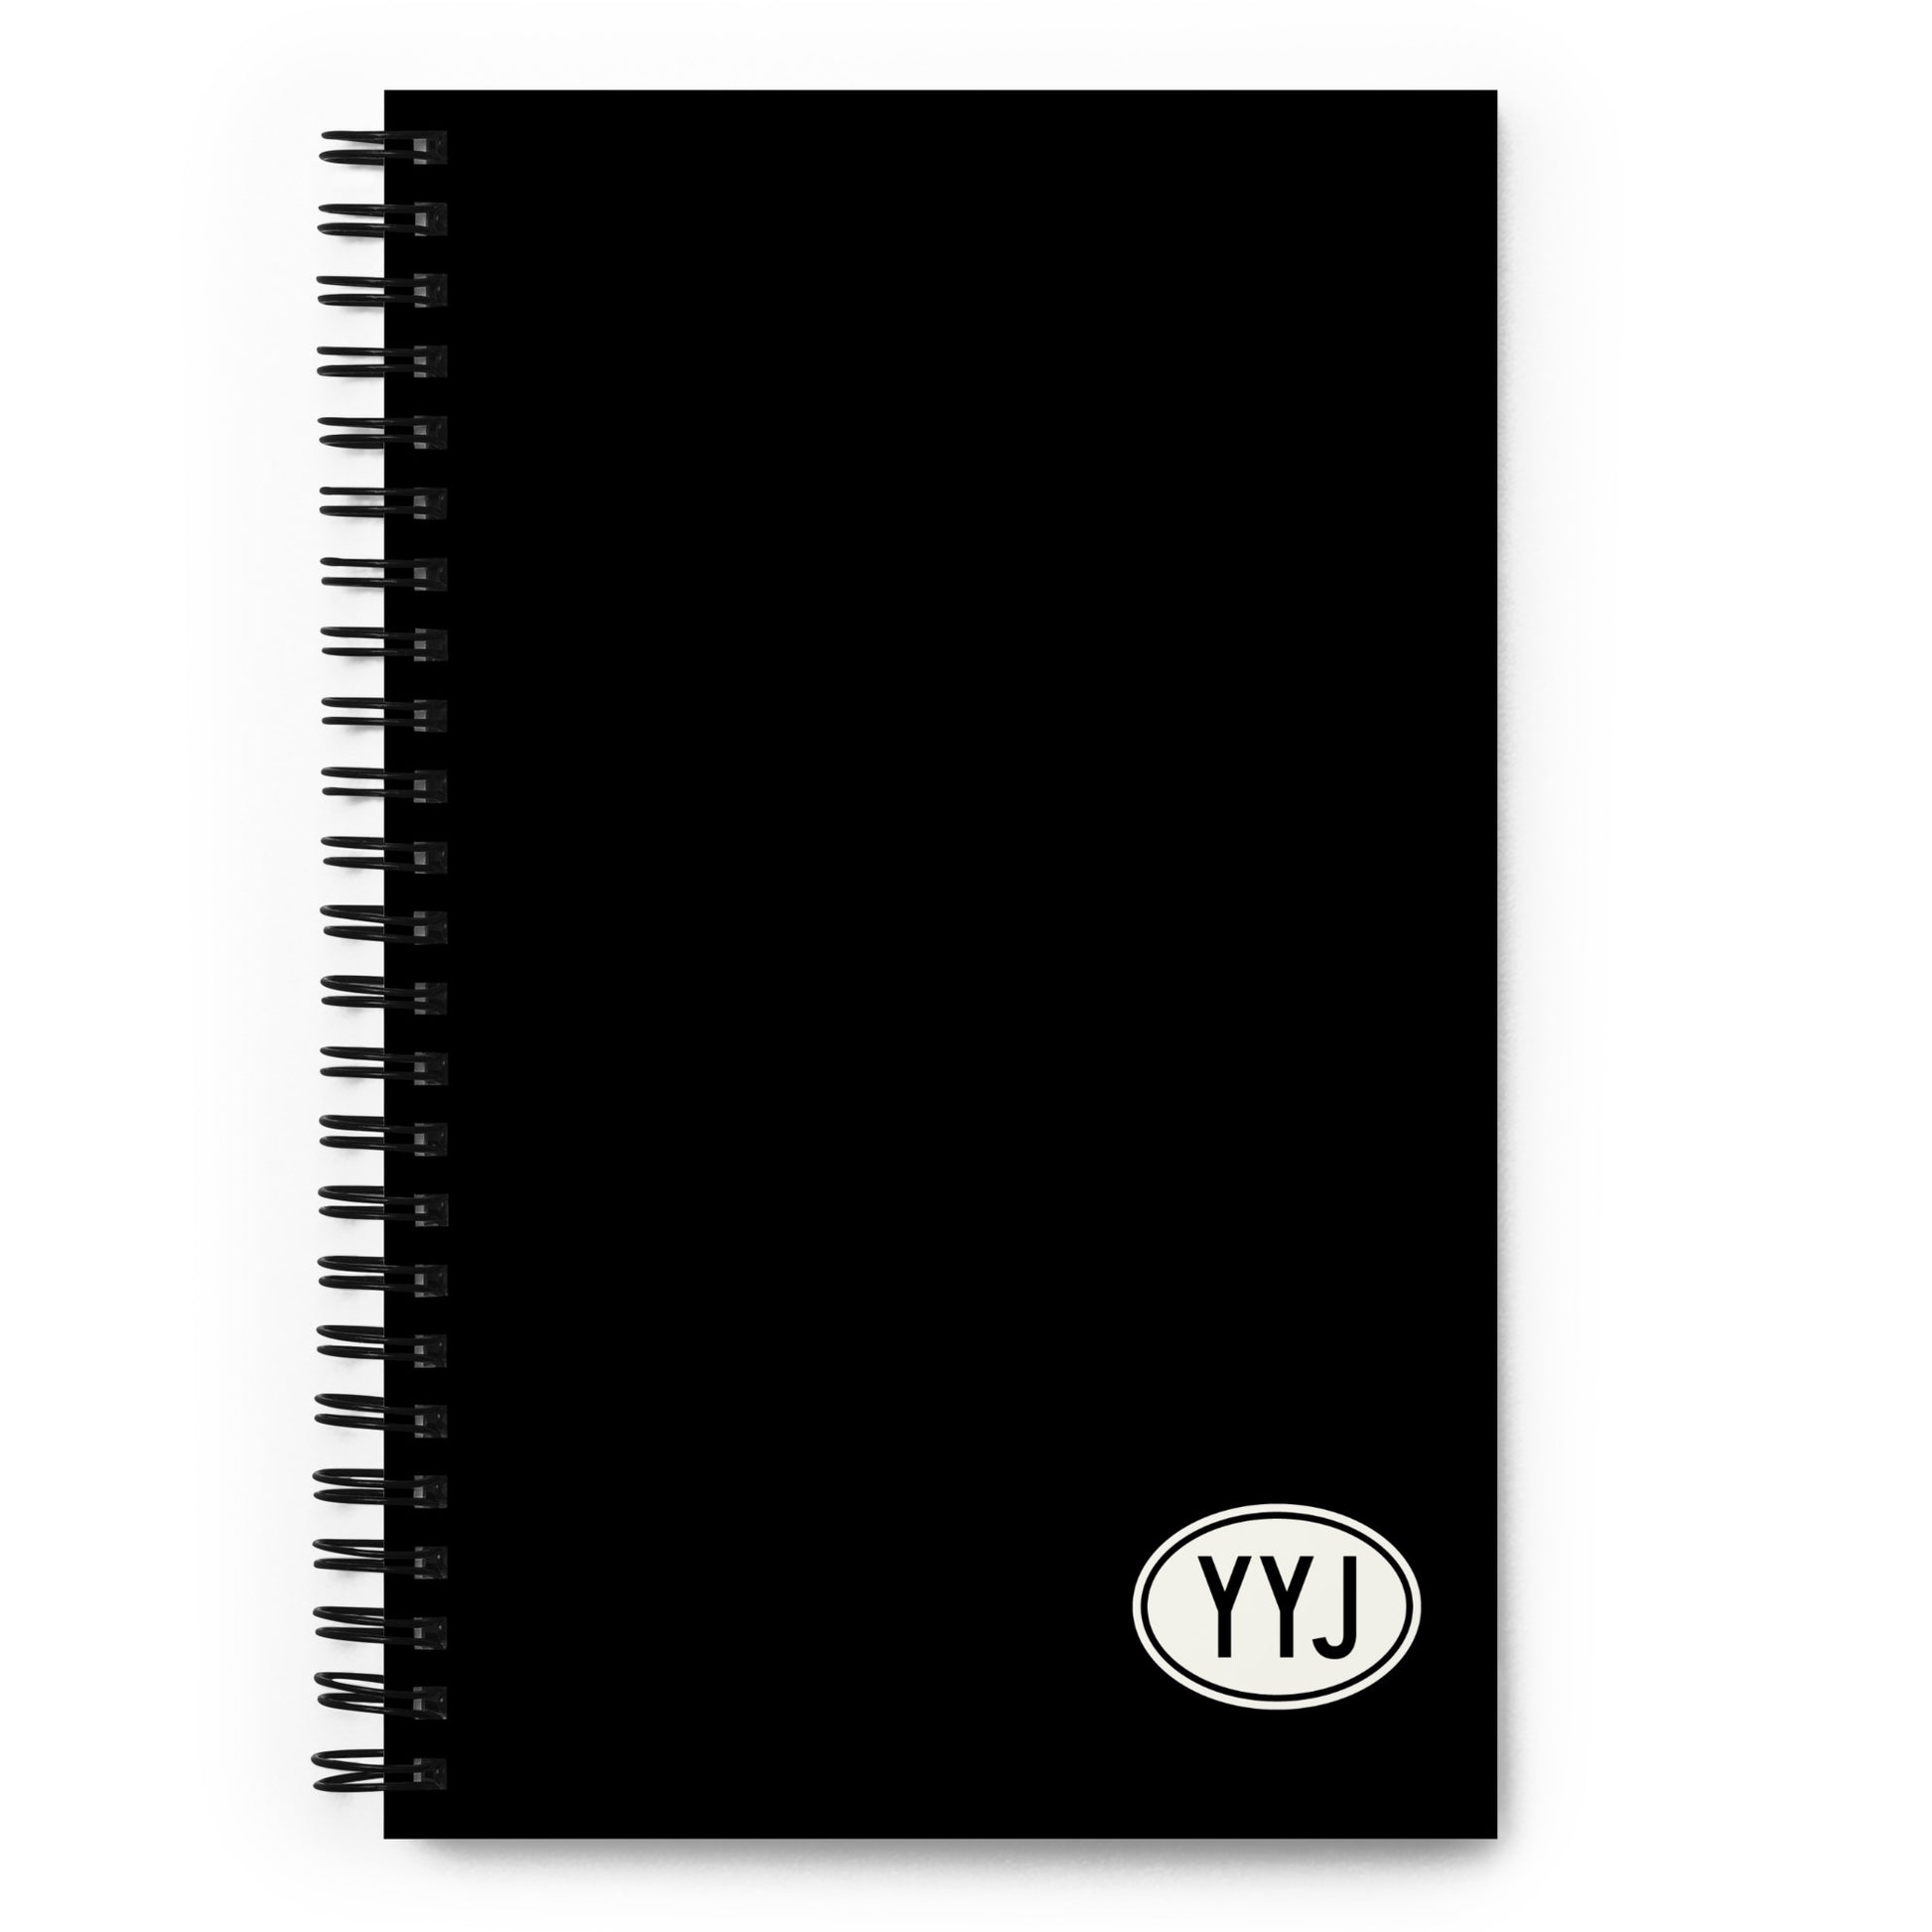 Unique Travel Gift Spiral Notebook - White Oval • YYJ Victoria • YHM Designs - Image 01